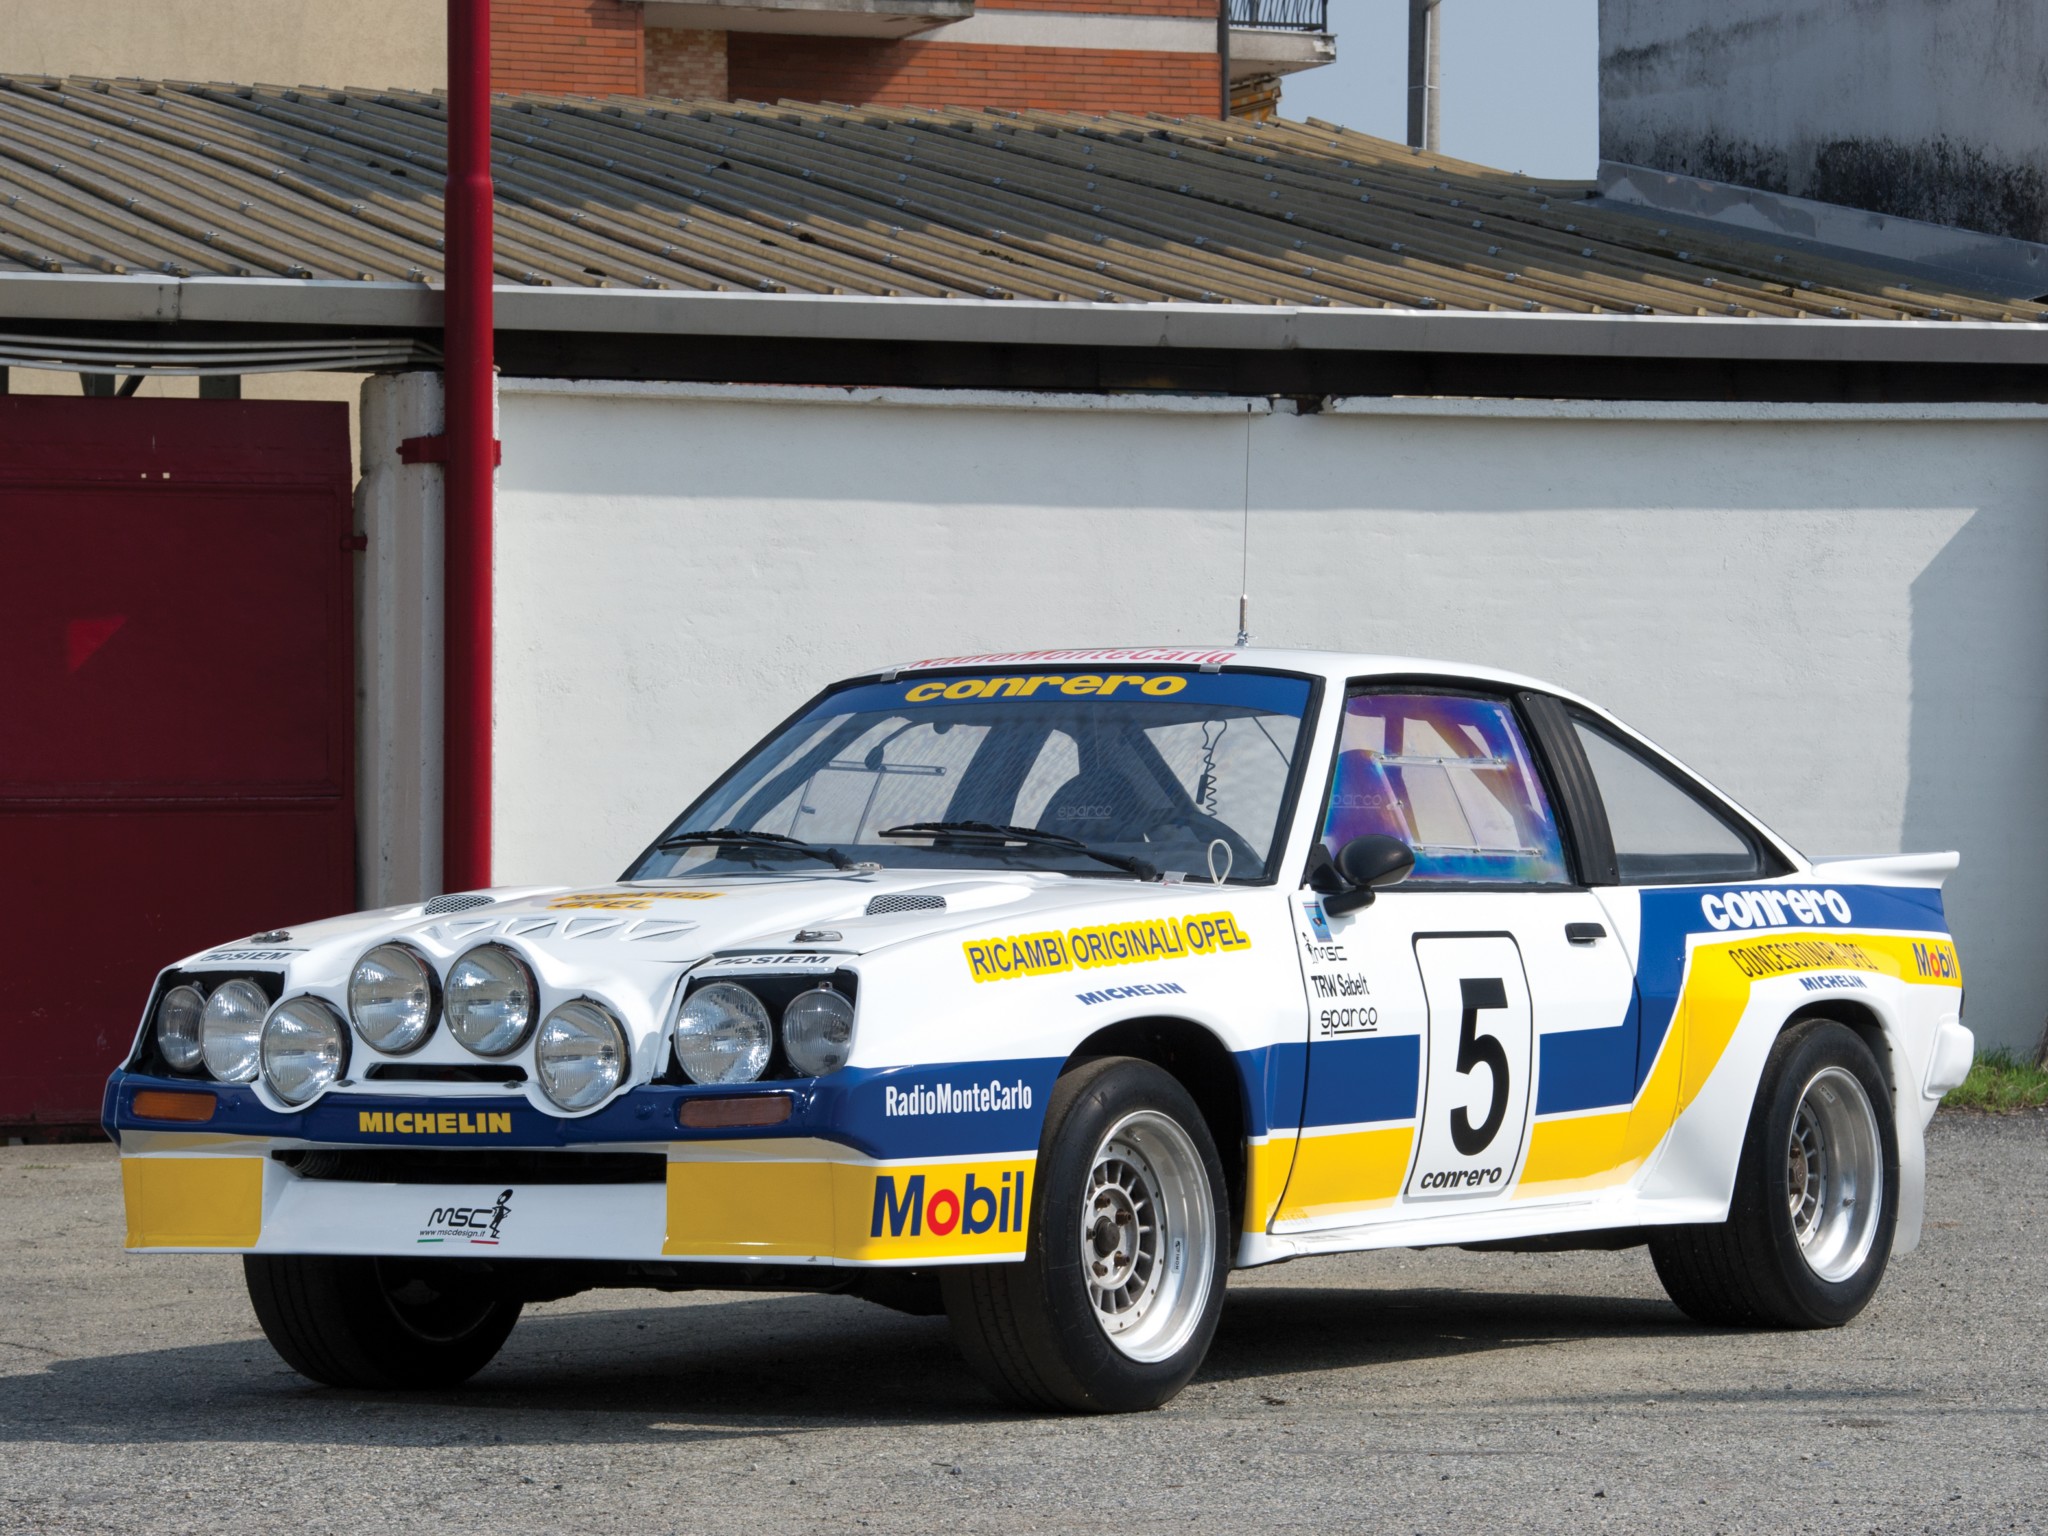 You can vote for this Opel Manta 400 Rally photo